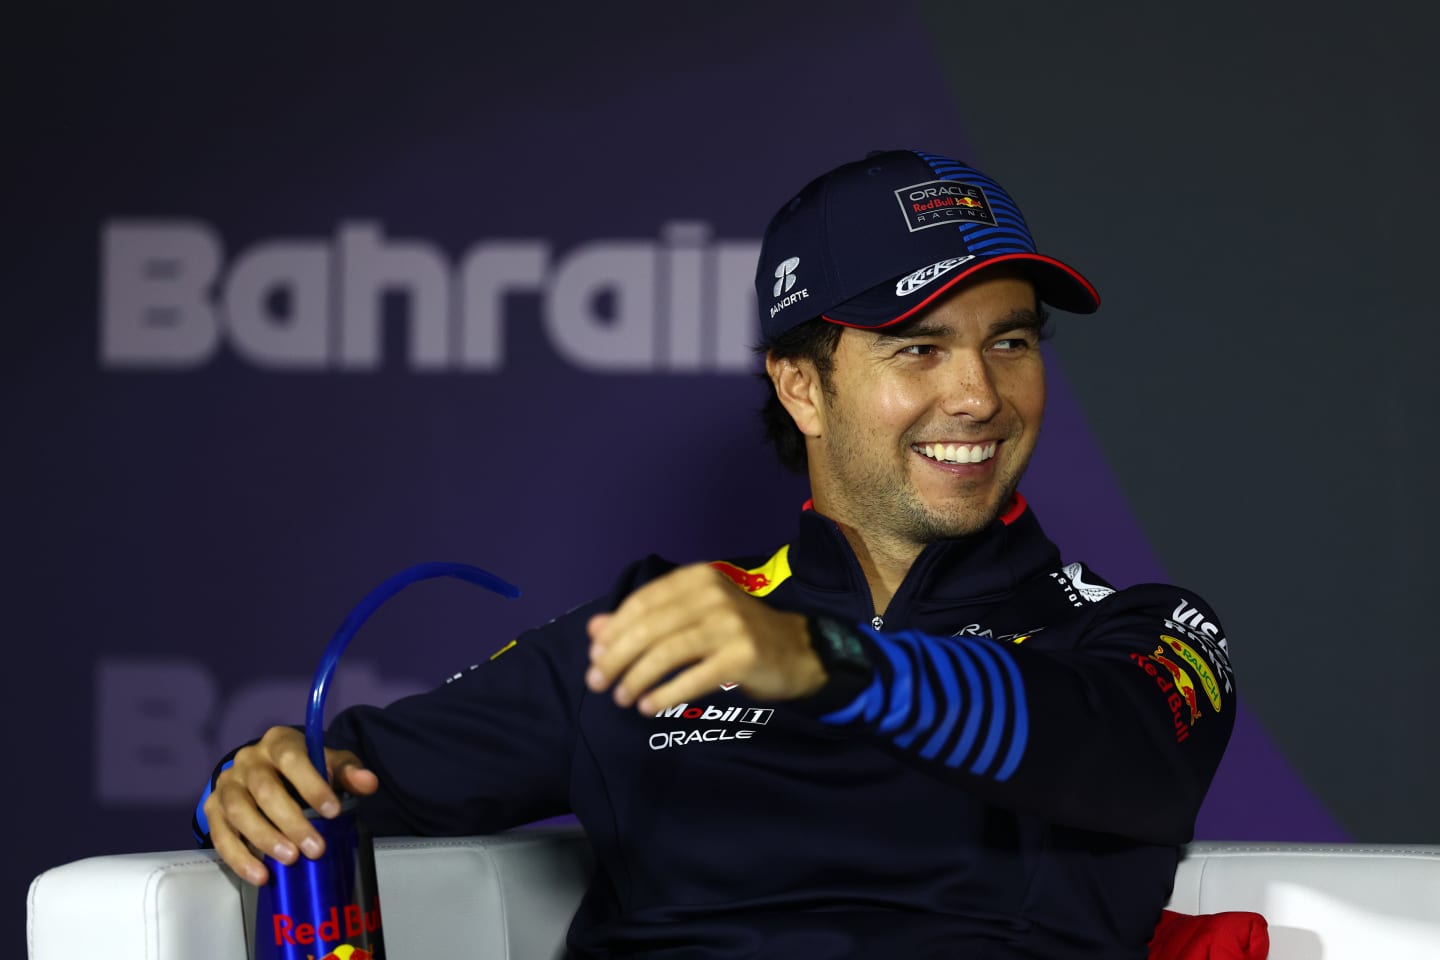 BAHRAIN, BAHRAIN - MARCH 02: Second placed Sergio Perez of Mexico and Oracle Red Bull Racing reacts in a press conference after the F1 Grand Prix of Bahrain at Bahrain International Circuit on March 02, 2024 in Bahrain, Bahrain. (Photo by Bryn Lennon/Getty Images)